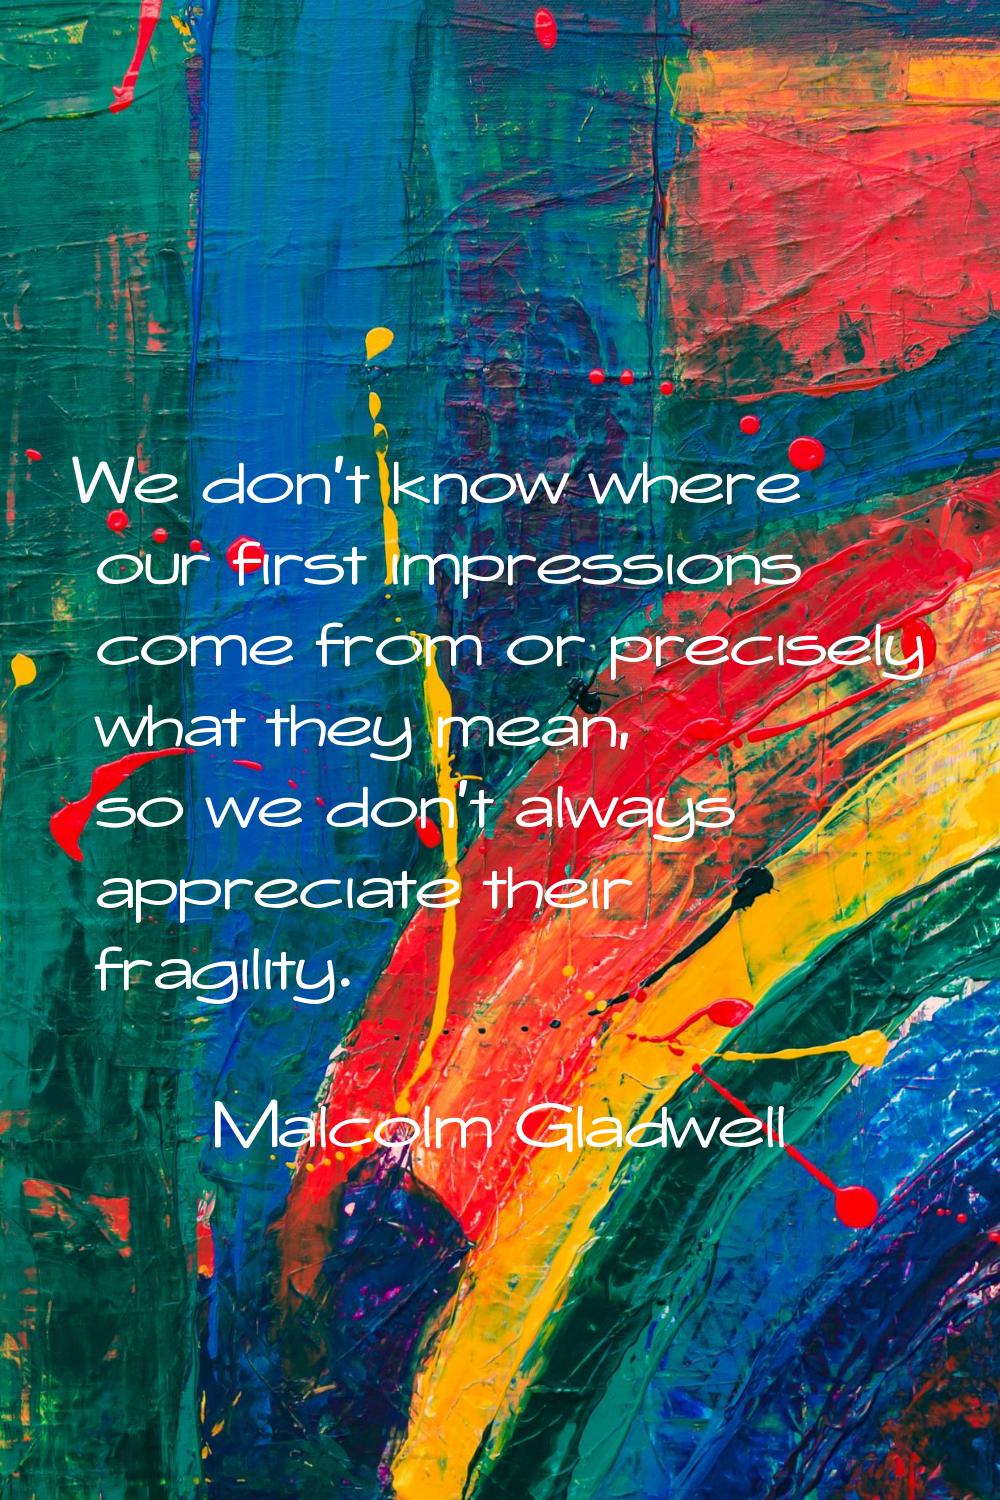 We don't know where our first impressions come from or precisely what they mean, so we don't always